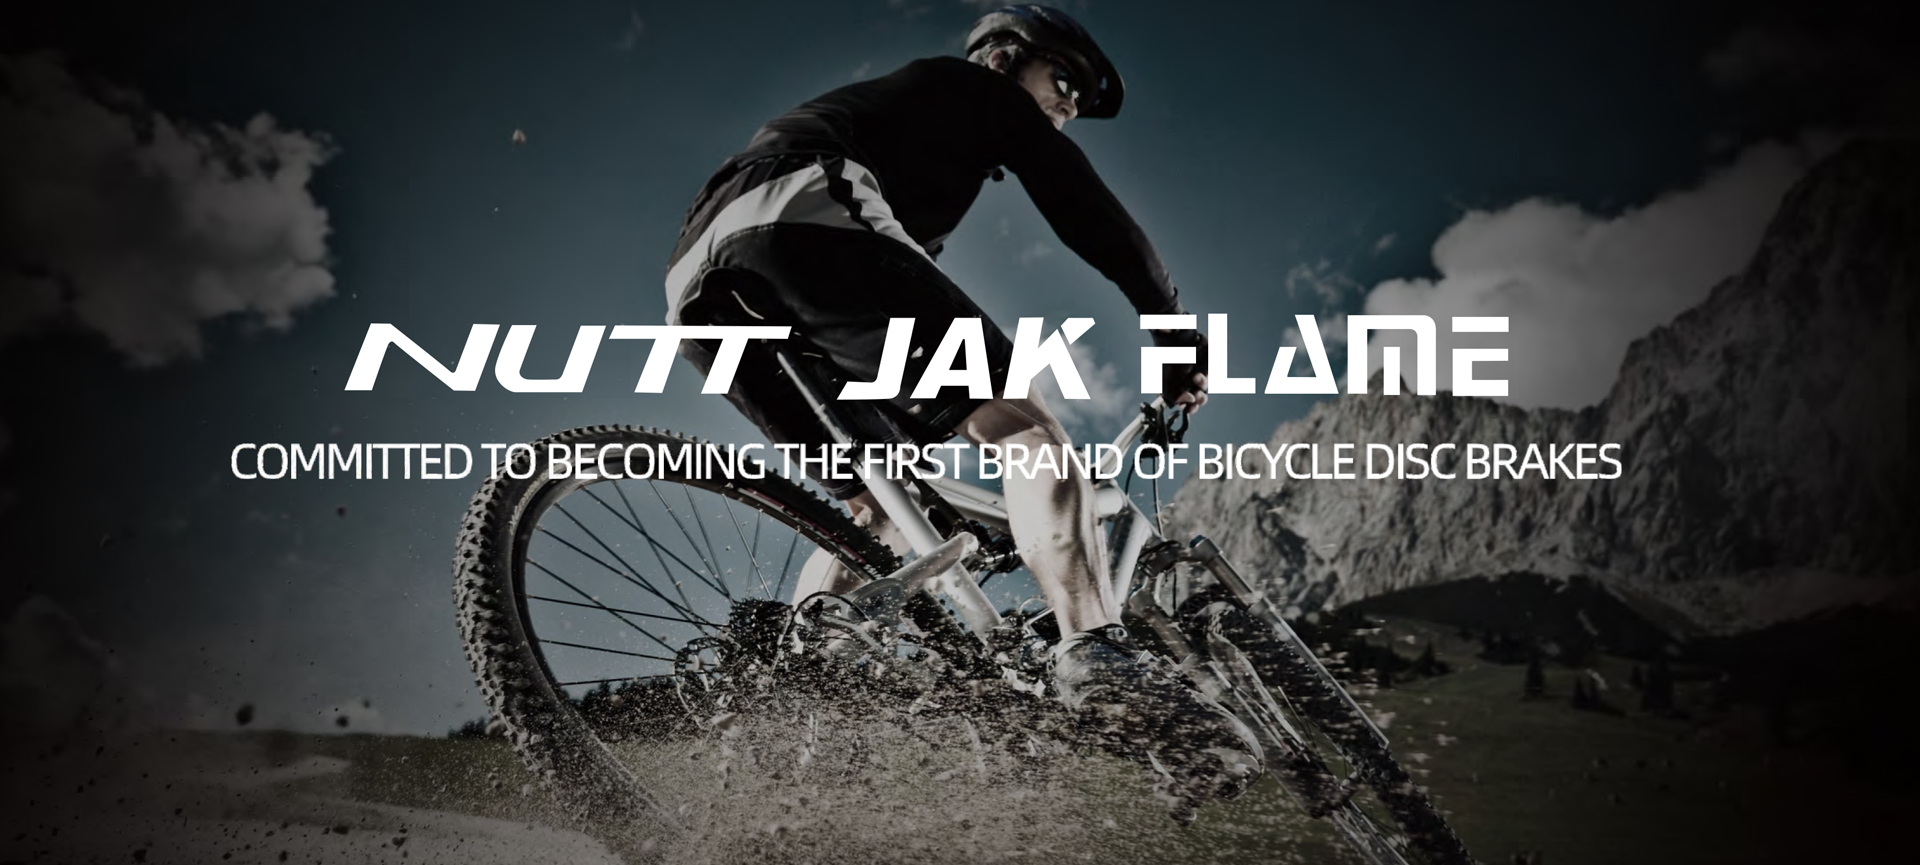 Become The First Brand Of Bicycle Disc Brakes